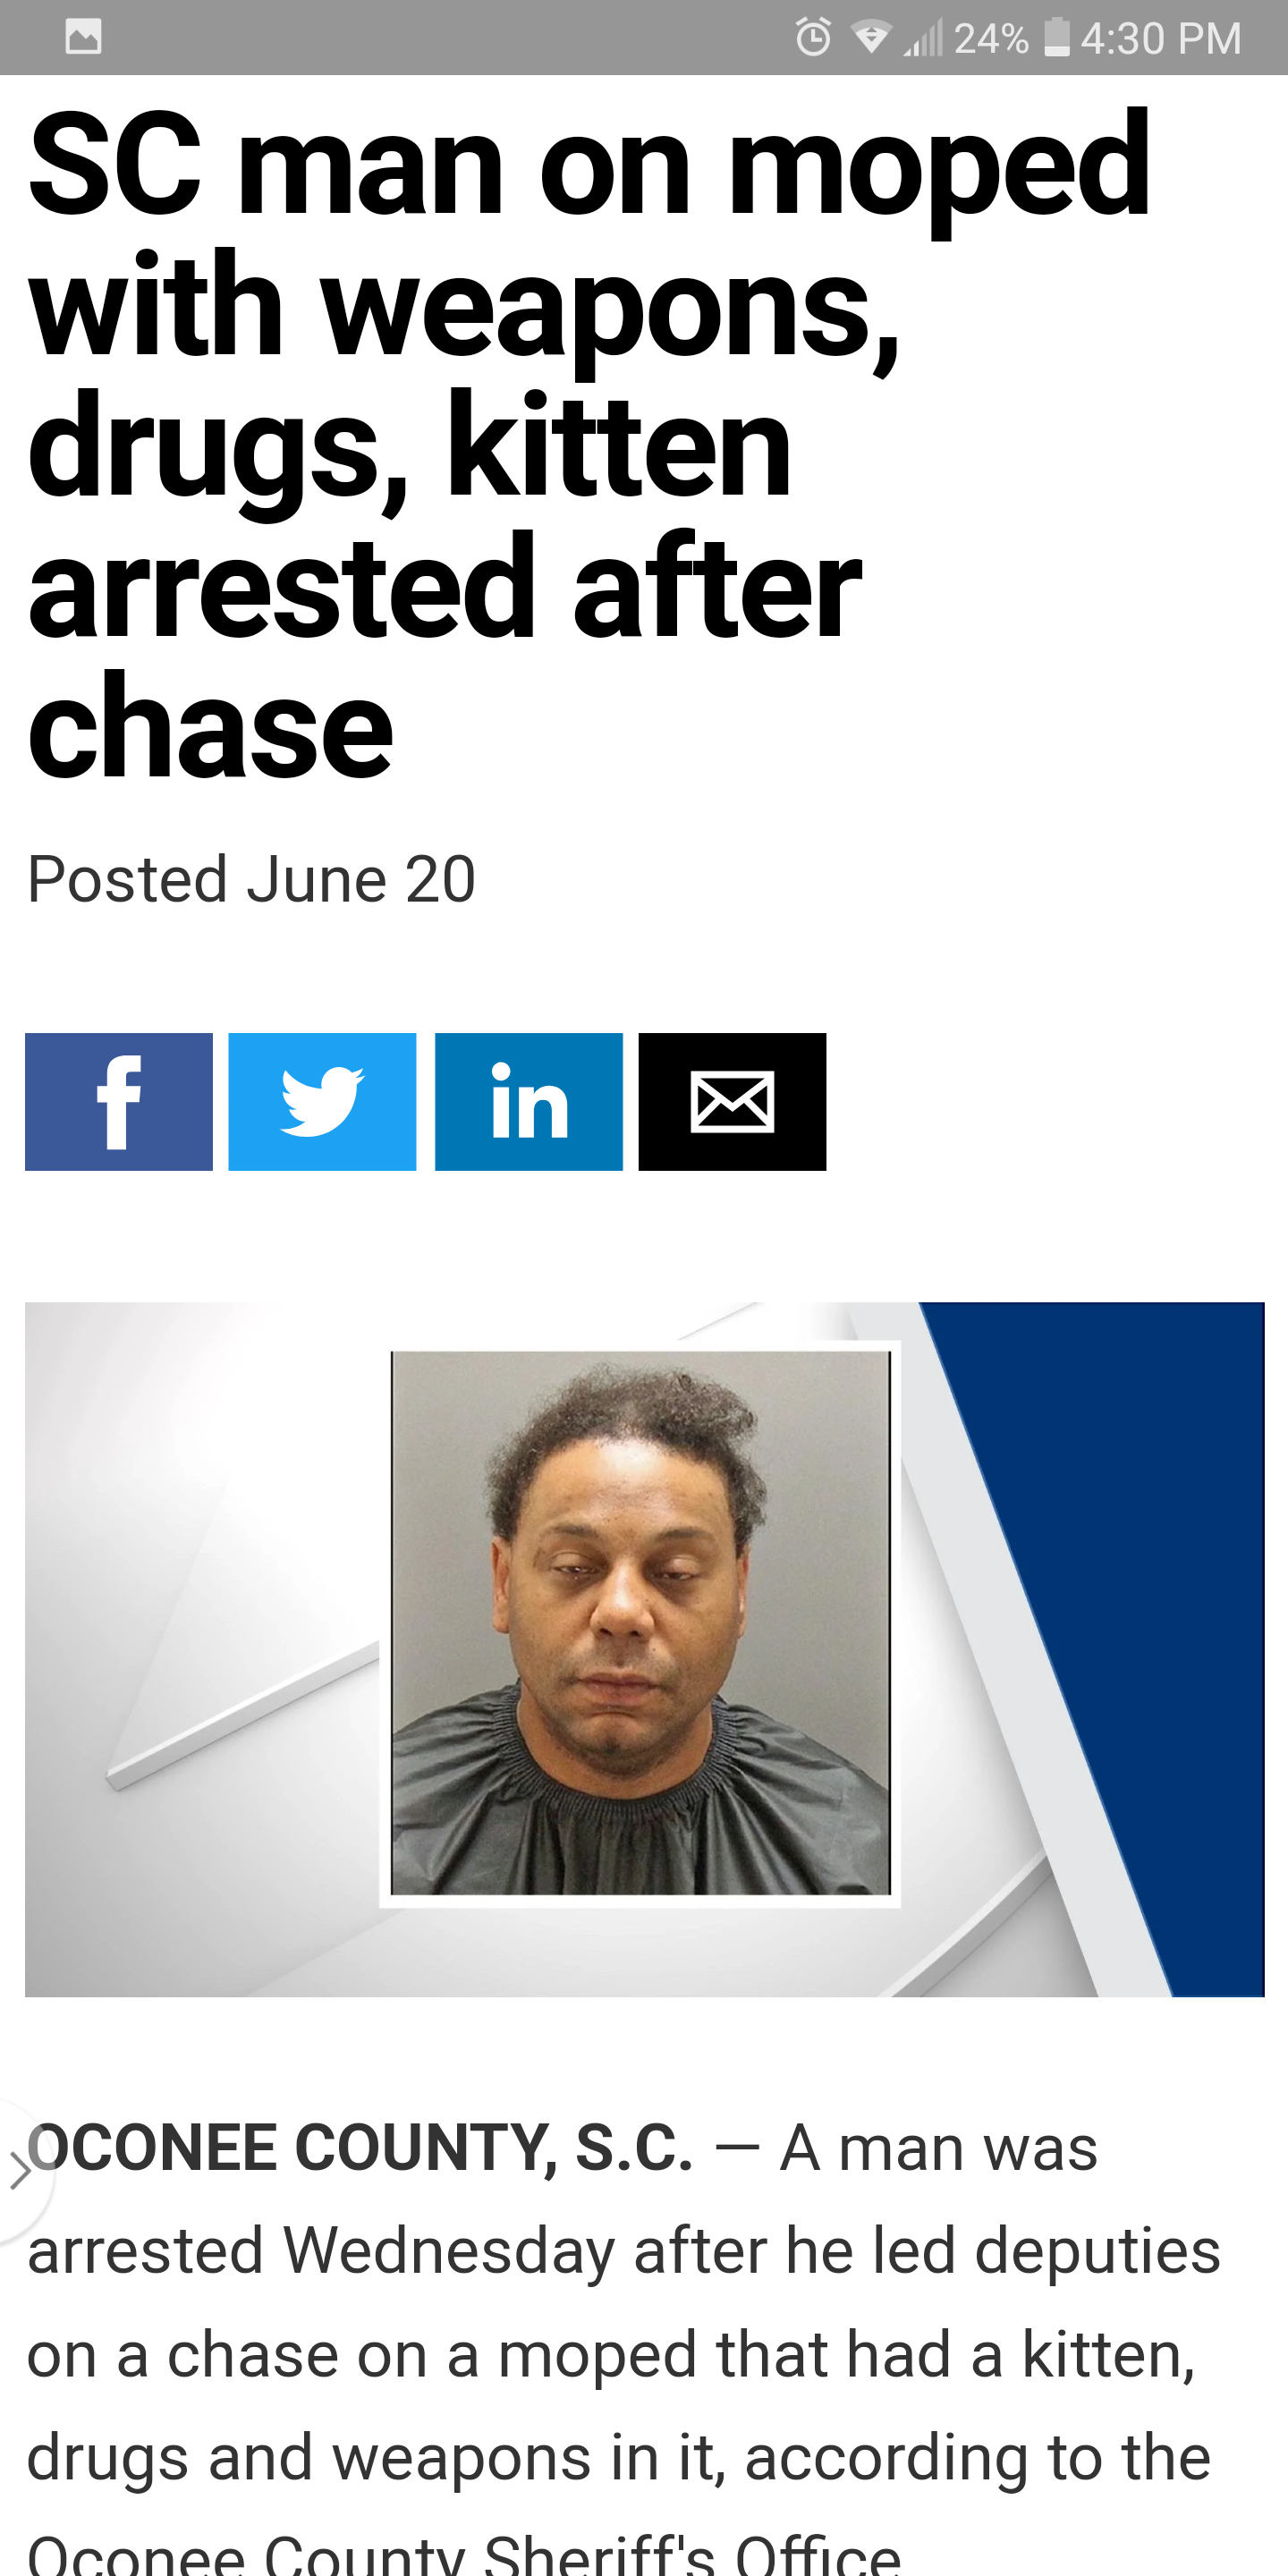 florida man 24 4 - .24% 4.30 Pm Sc man on moped with weapons, drugs, kitten arrested after chase Posted June 20 Oconee County, S.C. A man was arrested Wednesday after he led deputies on a chase on a moped that had a kitten, drugs and weapons in it, accord